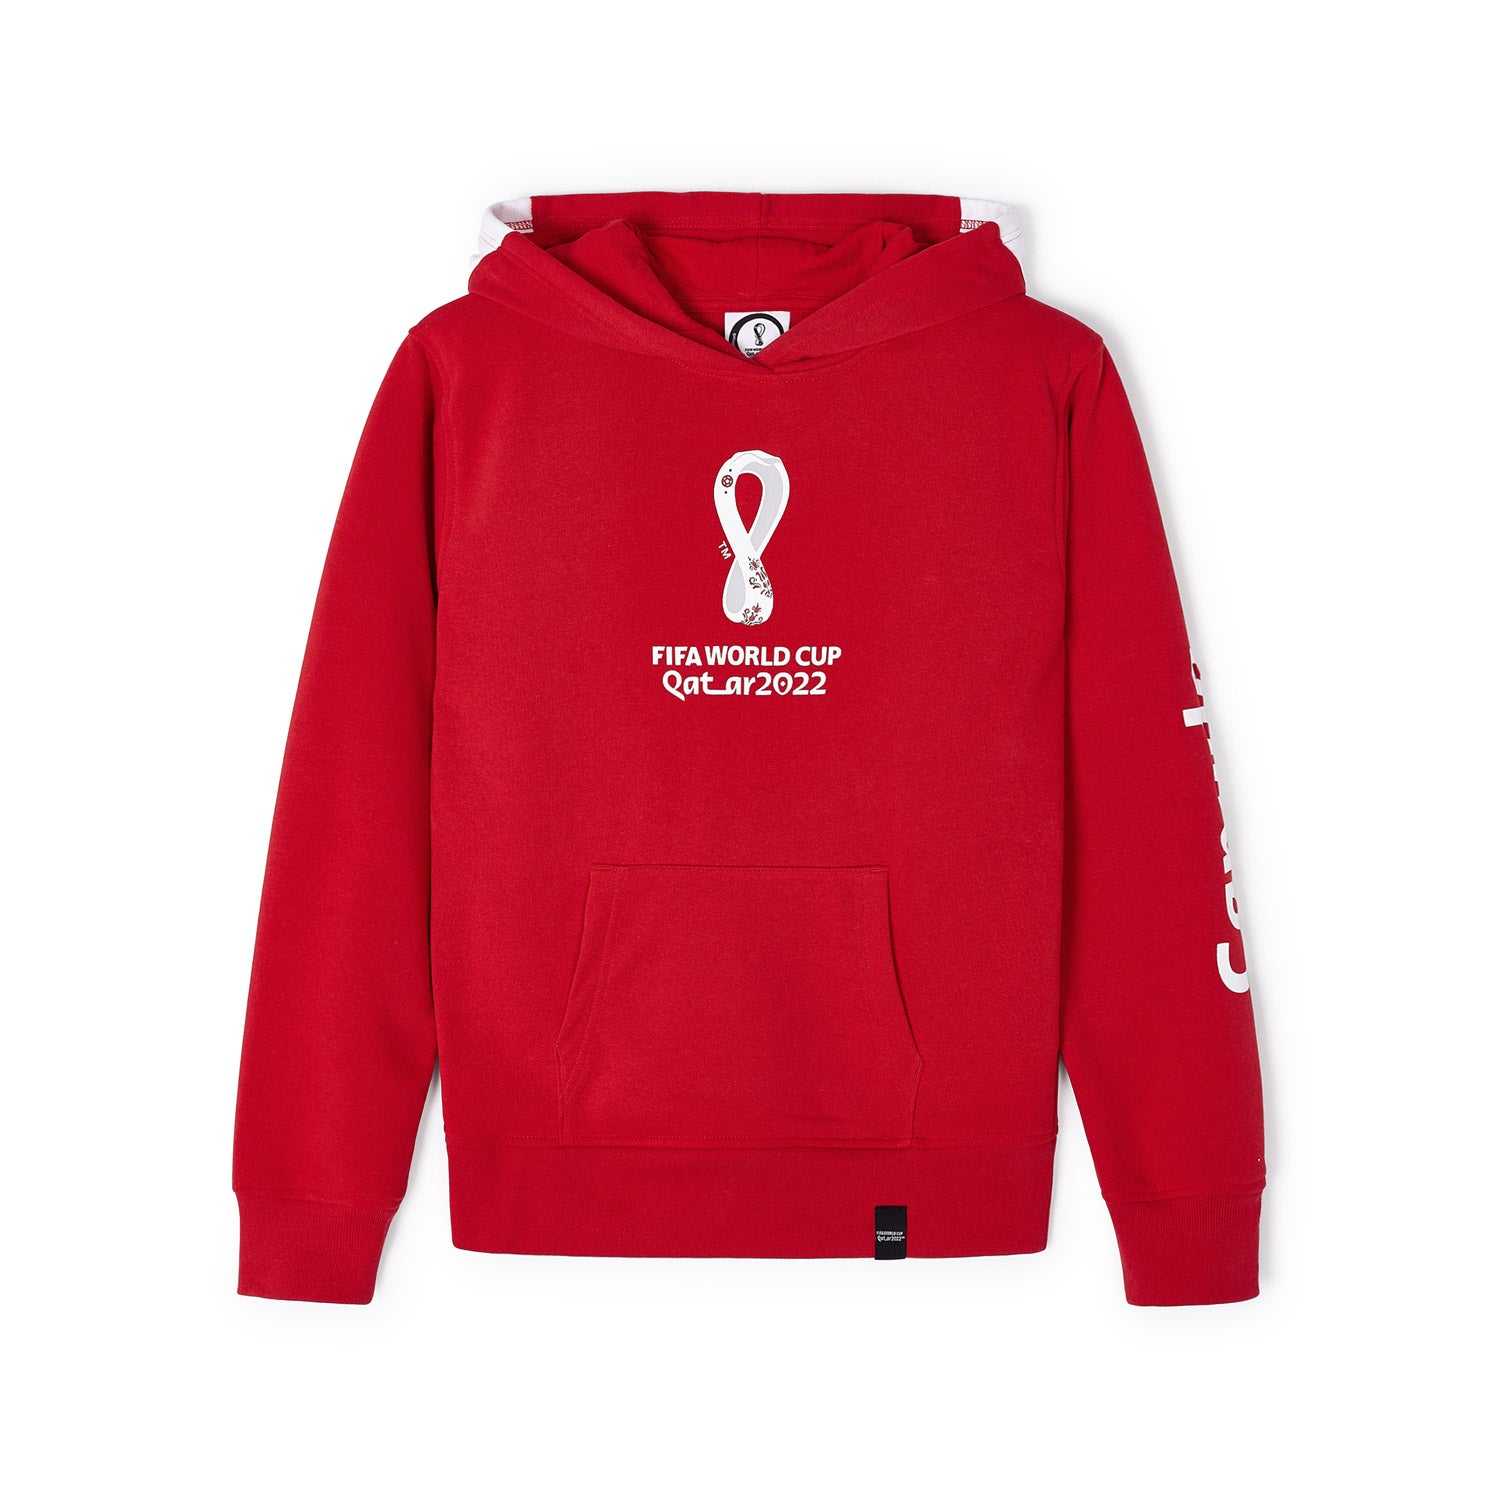 2022 World Cup Canada Red Hoodie - Women's